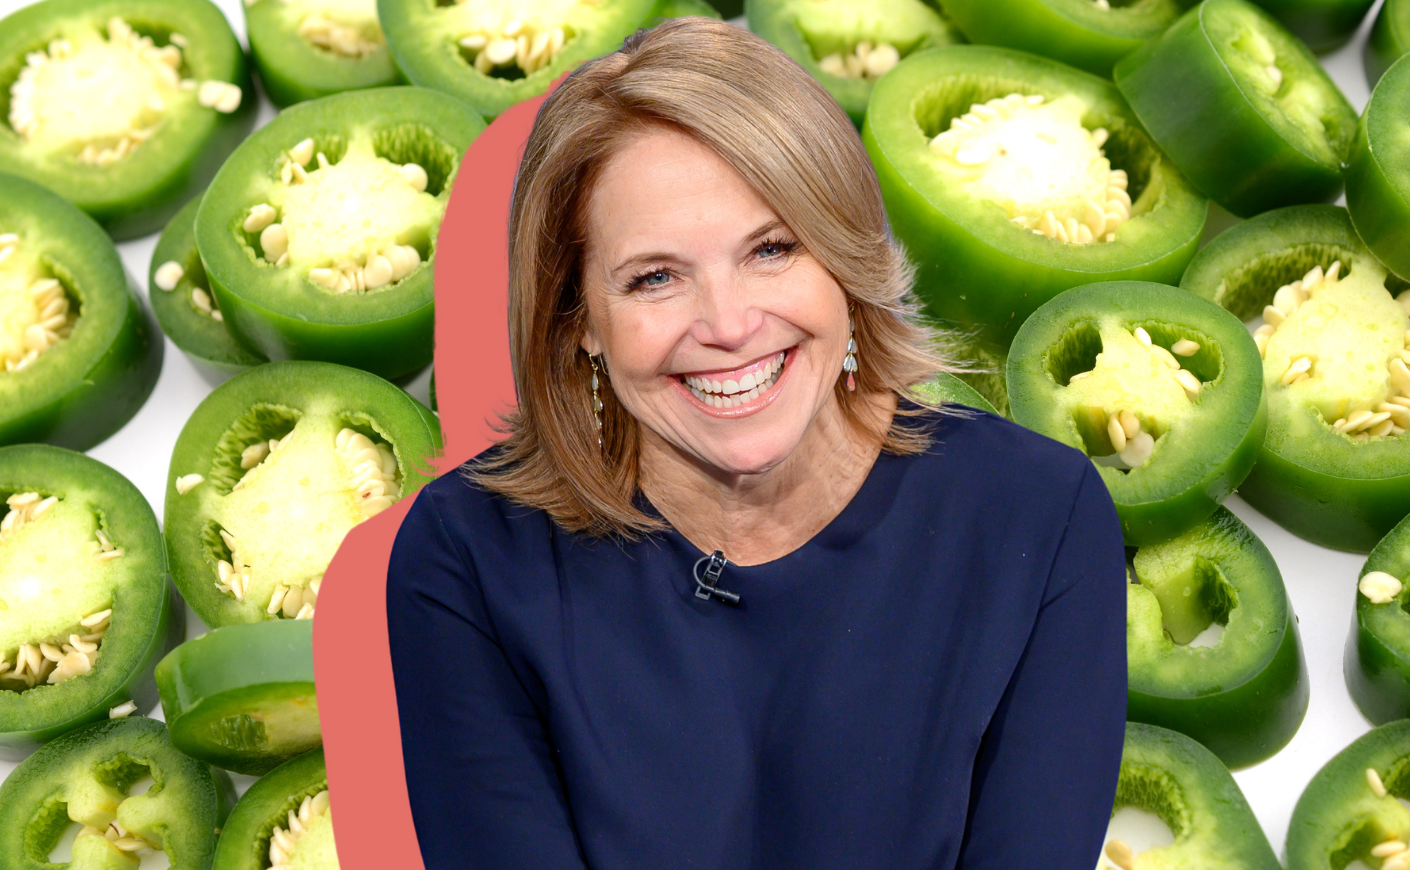 Katie Couric smiles widely in front of a background of sliced green jalapeno peppers.